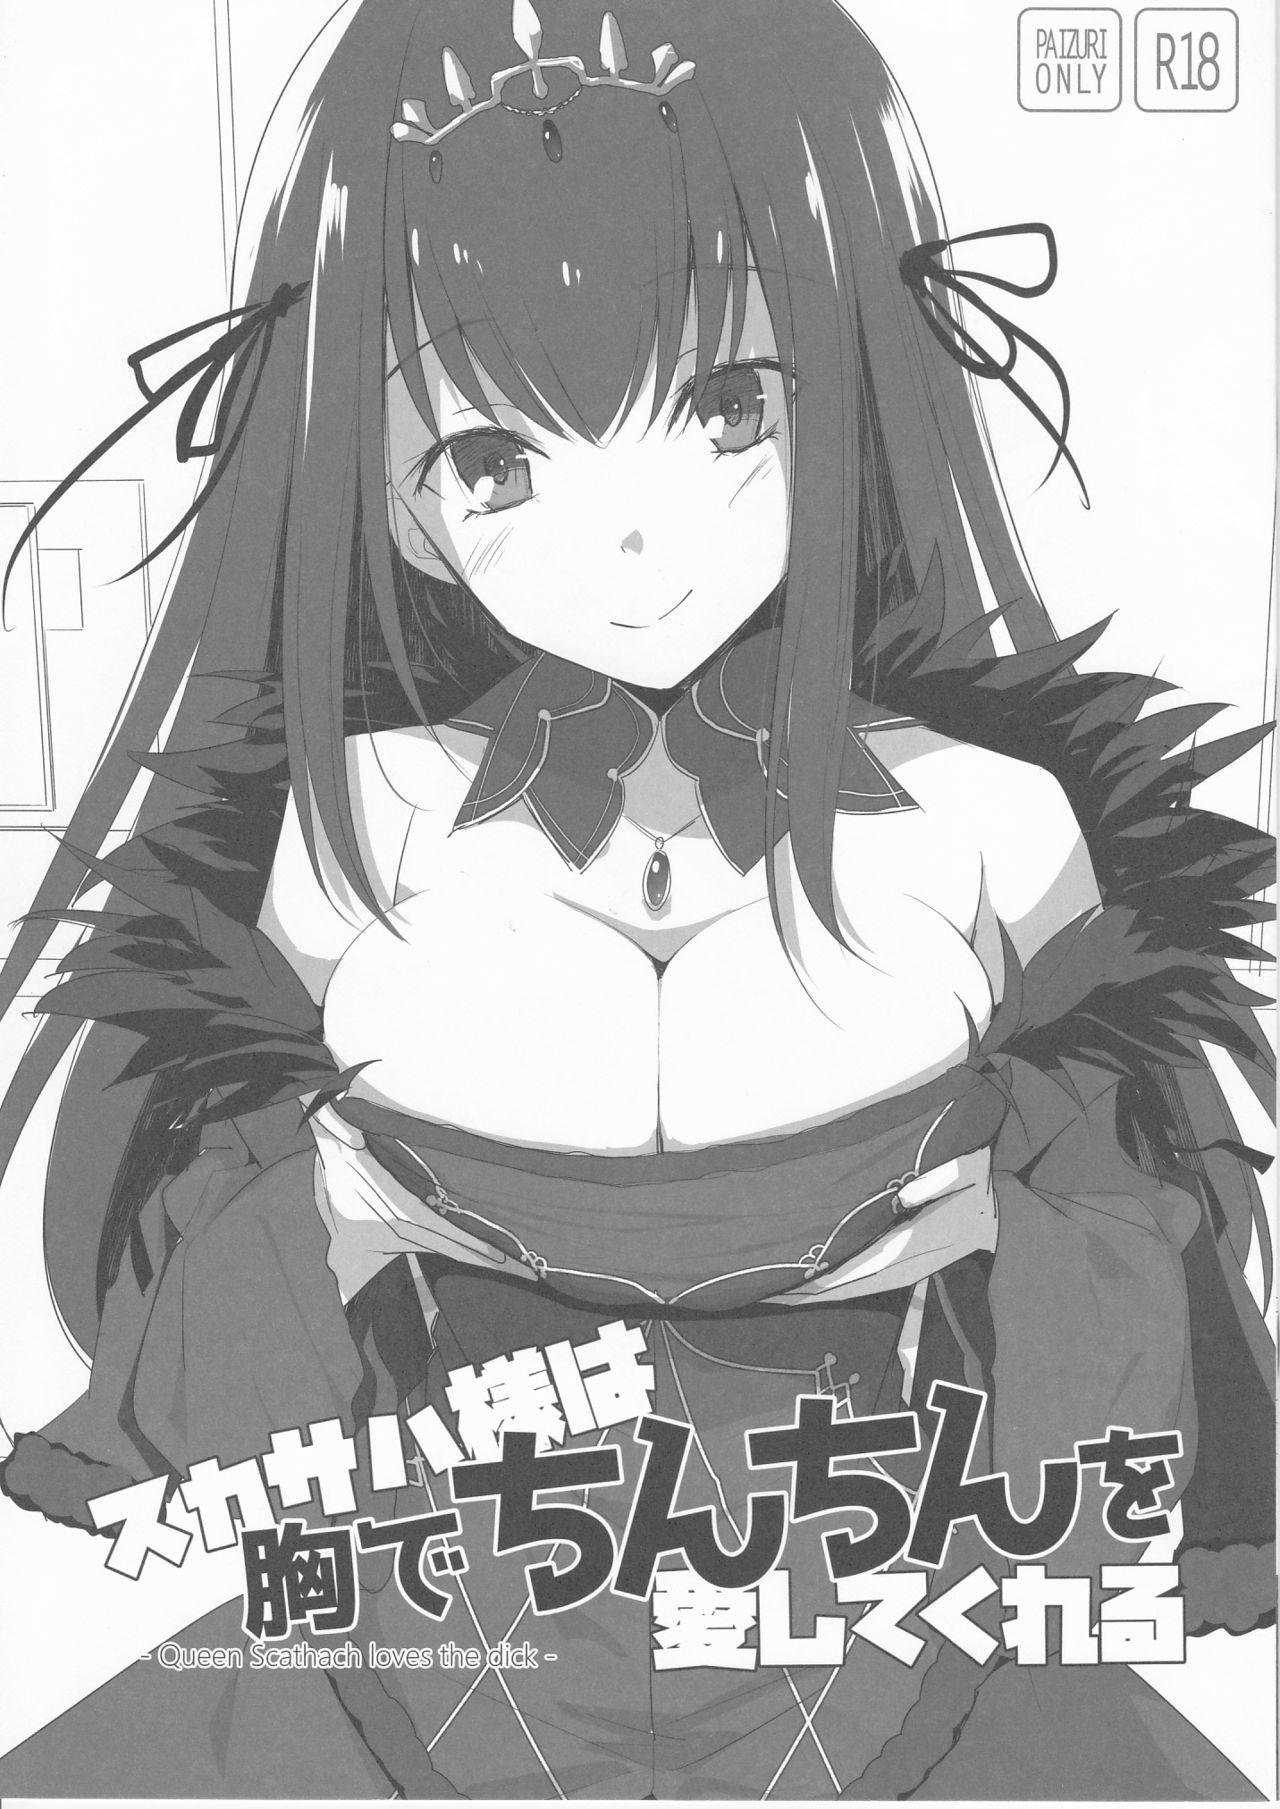 ScathachQueen Scathach loves the dick 1